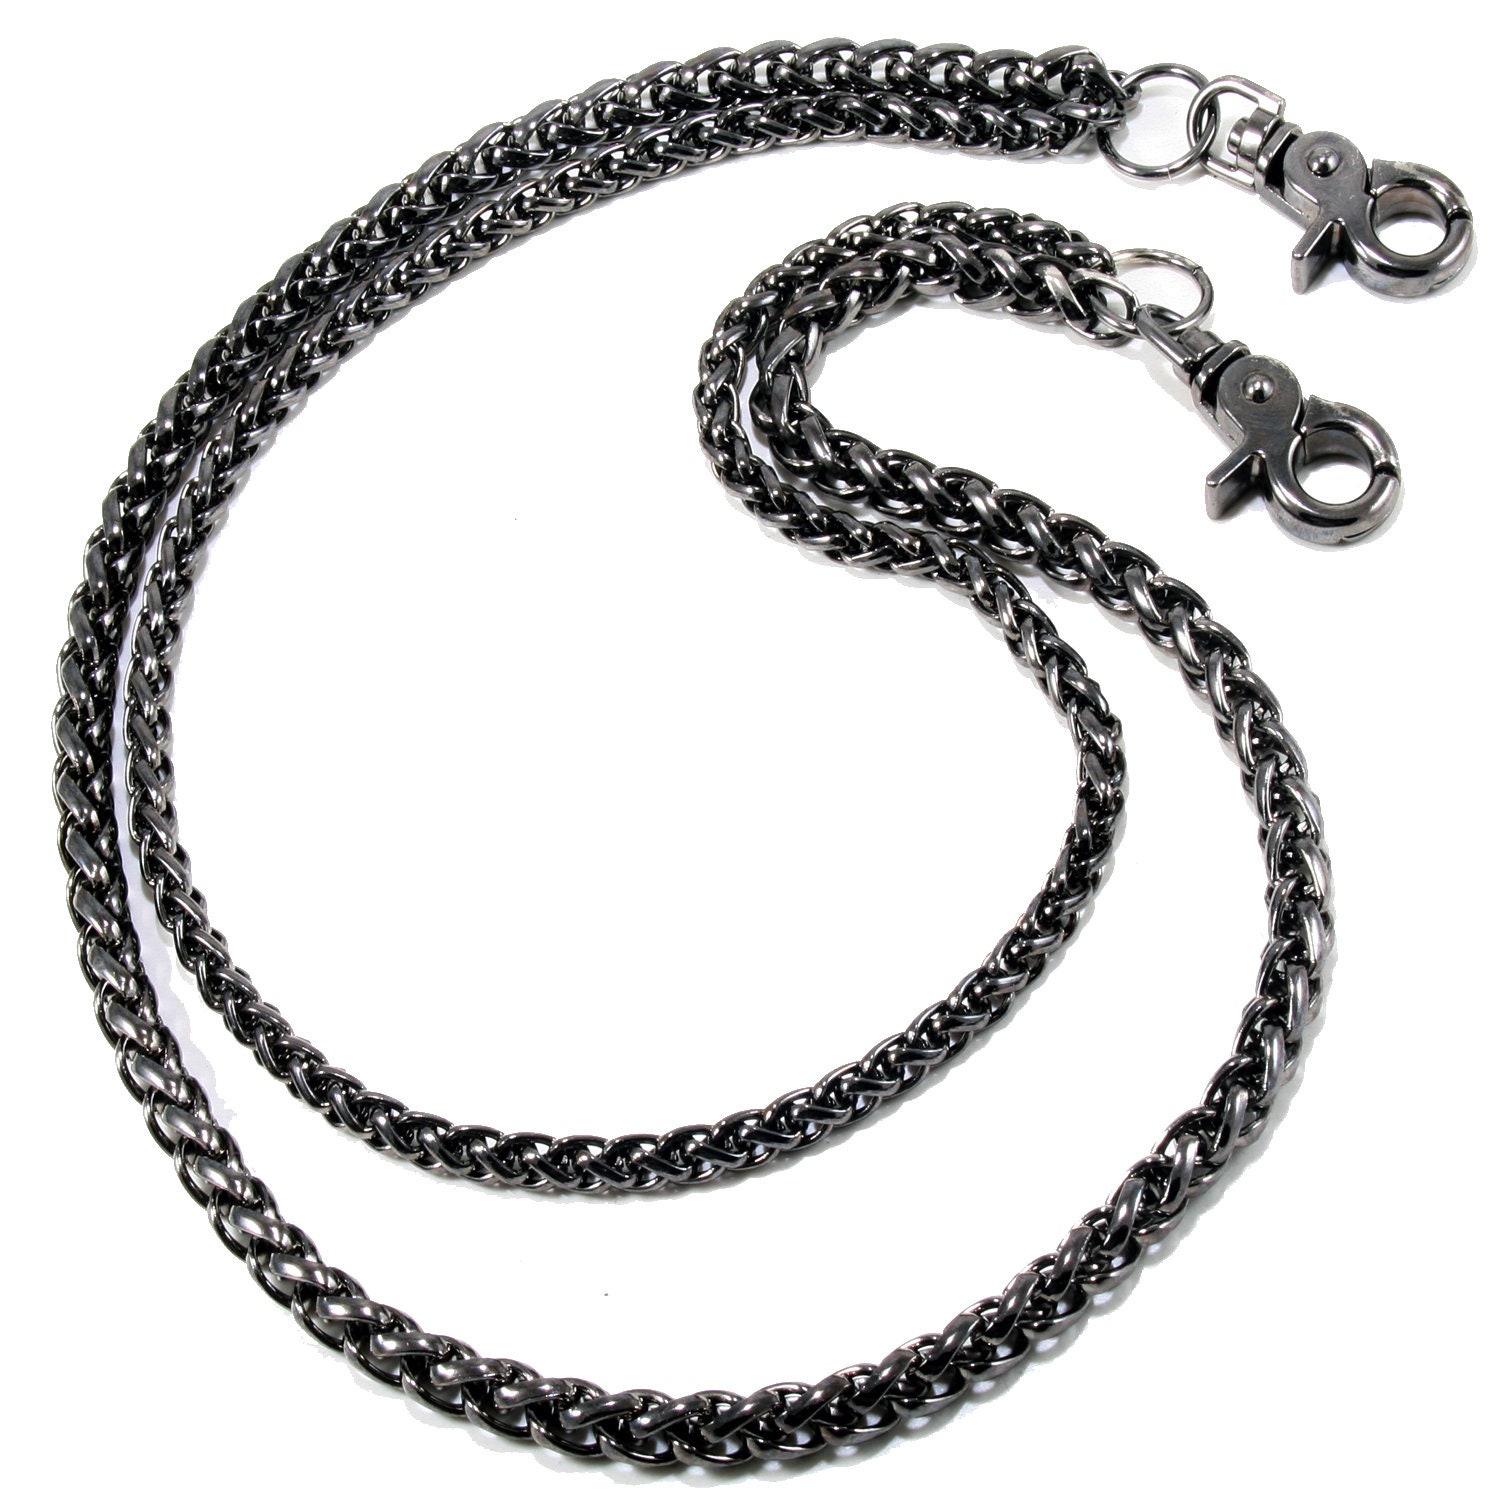 Chunky Hardware Pant Chains Unisex Heavy Duty Industrial Stainless